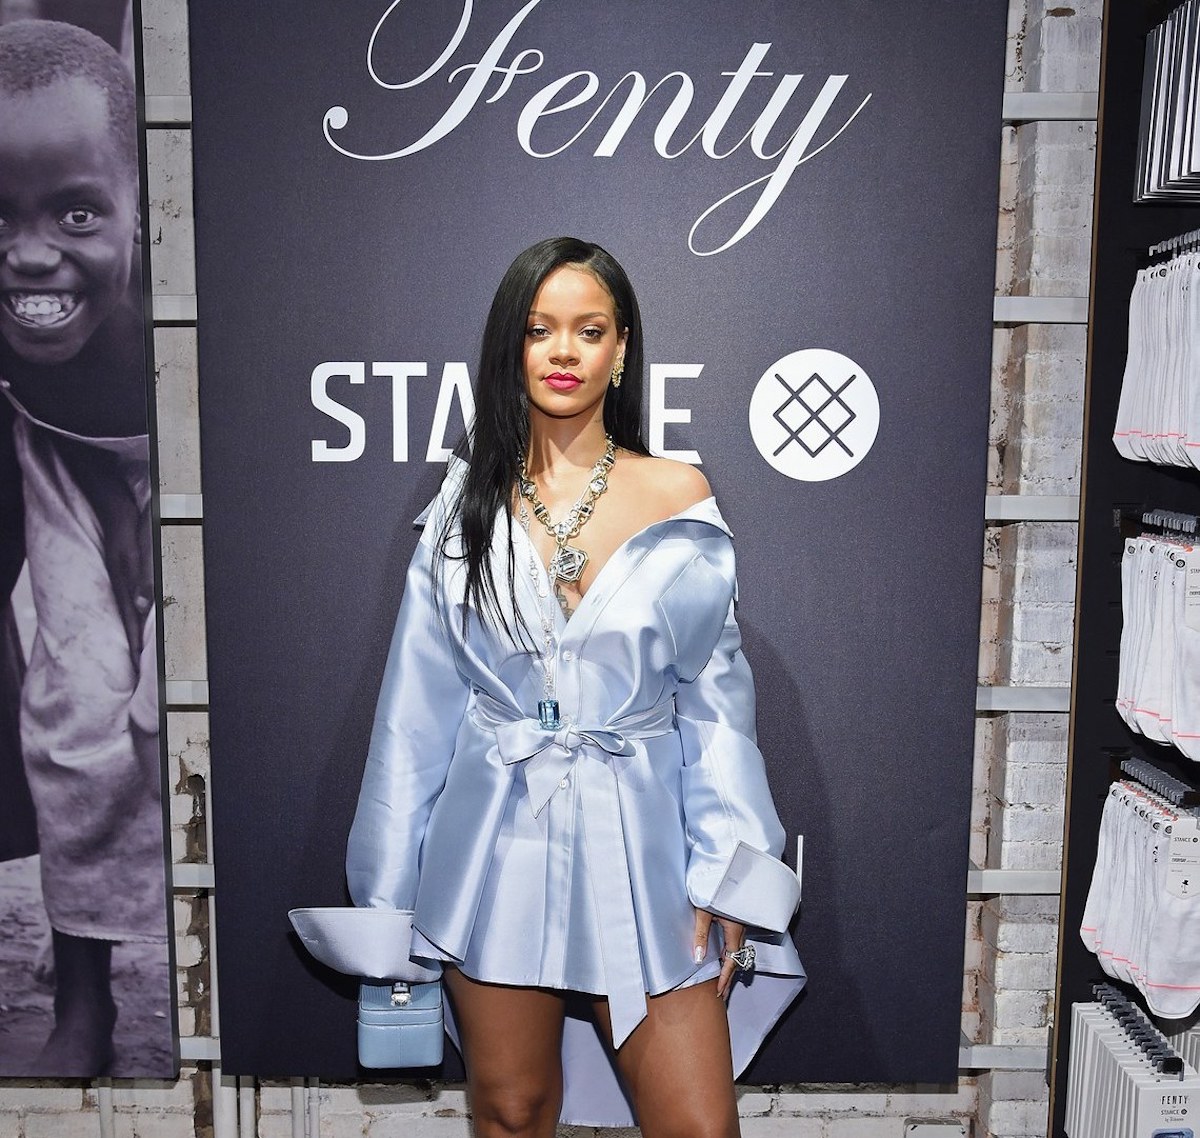 Rihanna’s New Fenty Label to Open NYC Pop-Up Store Later this Month